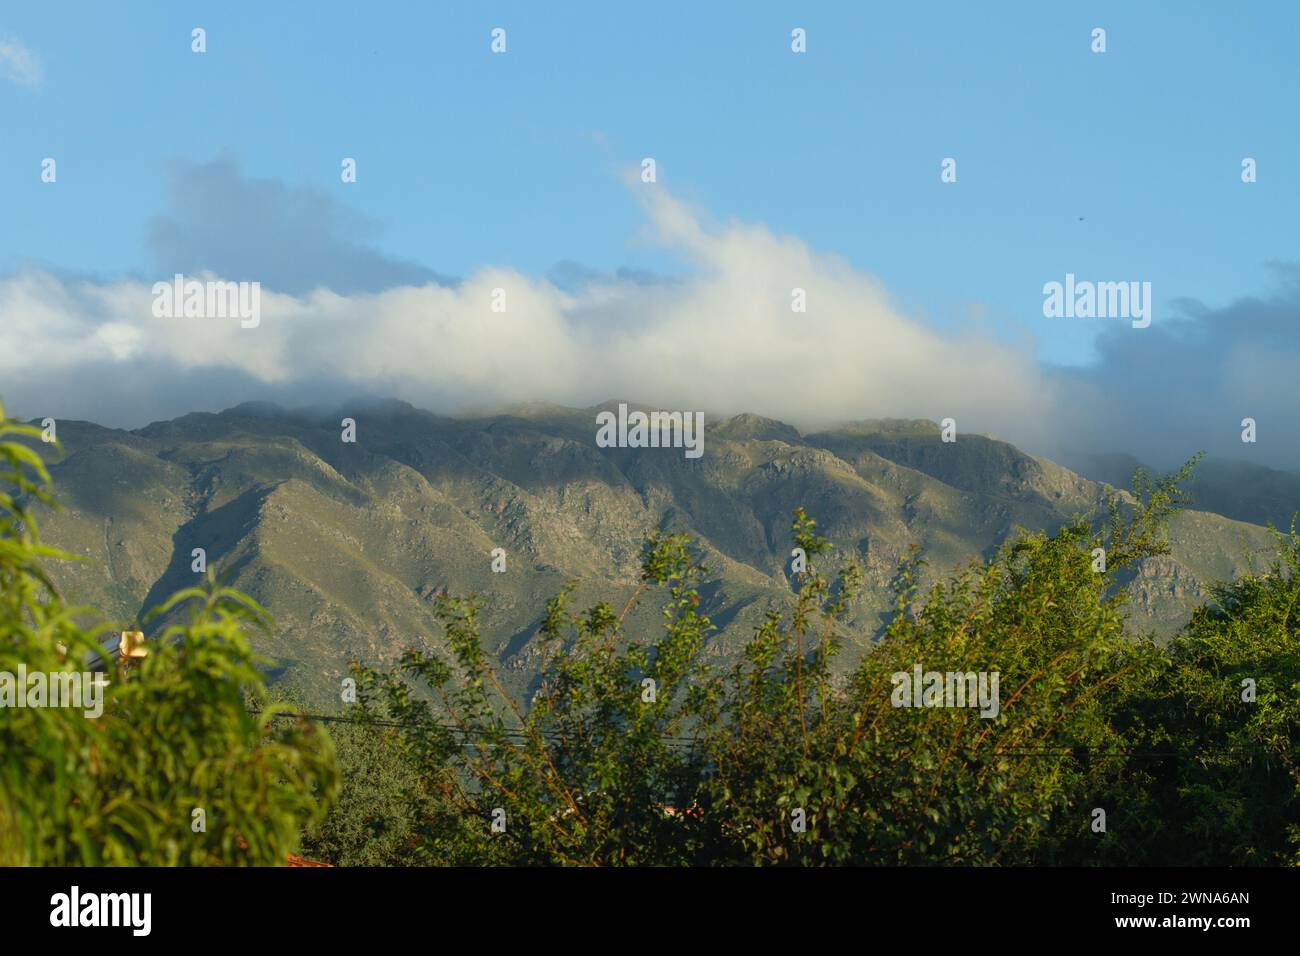 View of mountains with clouds over them Stock Photo